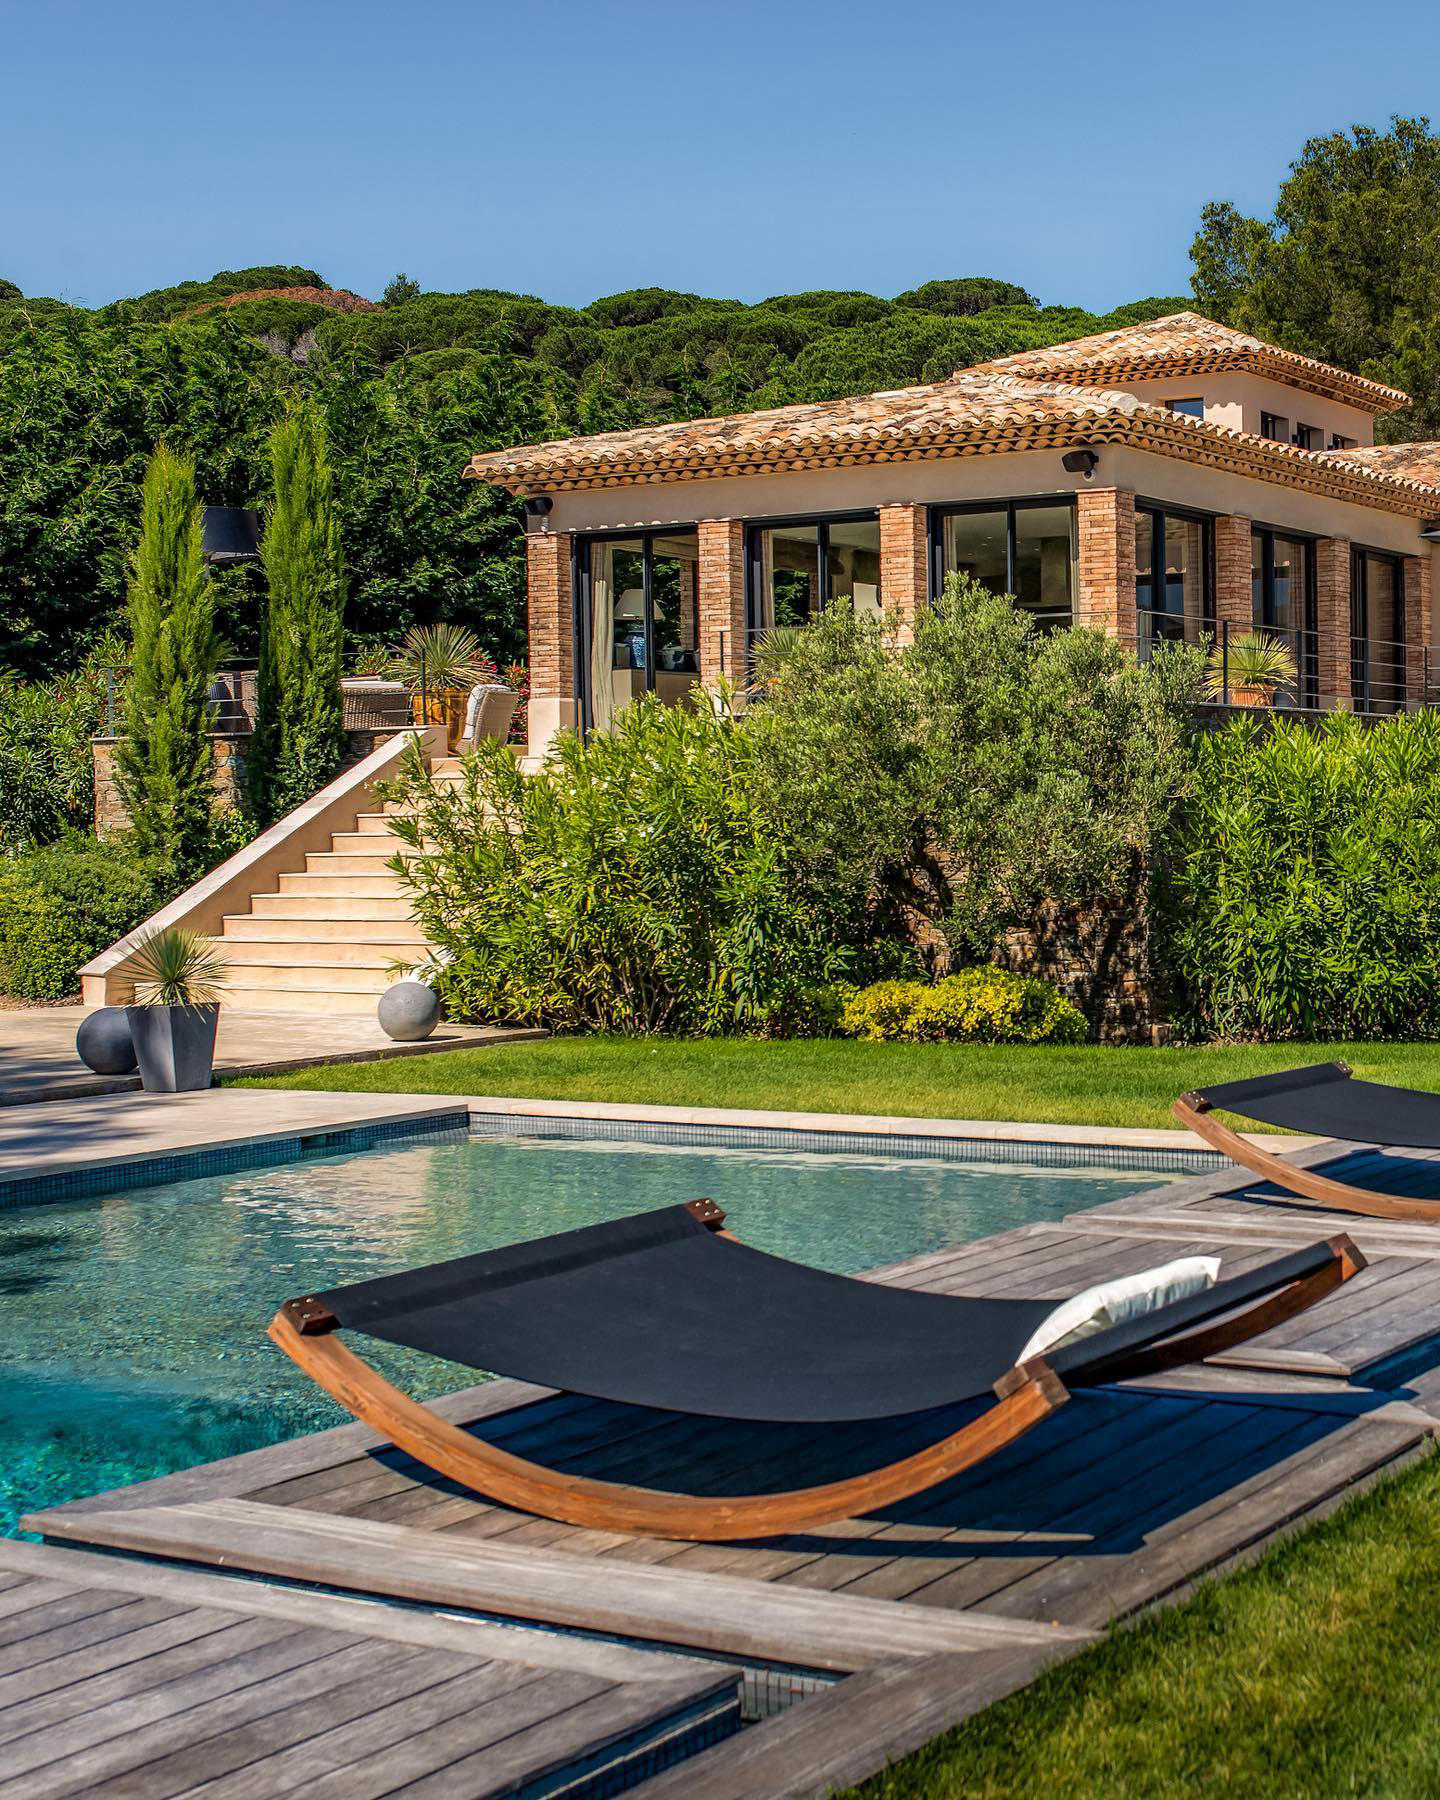 KRETZ FAMILY REAL ESTATE - Exceptional villa with a view of the Gulf of Saint-Tropez